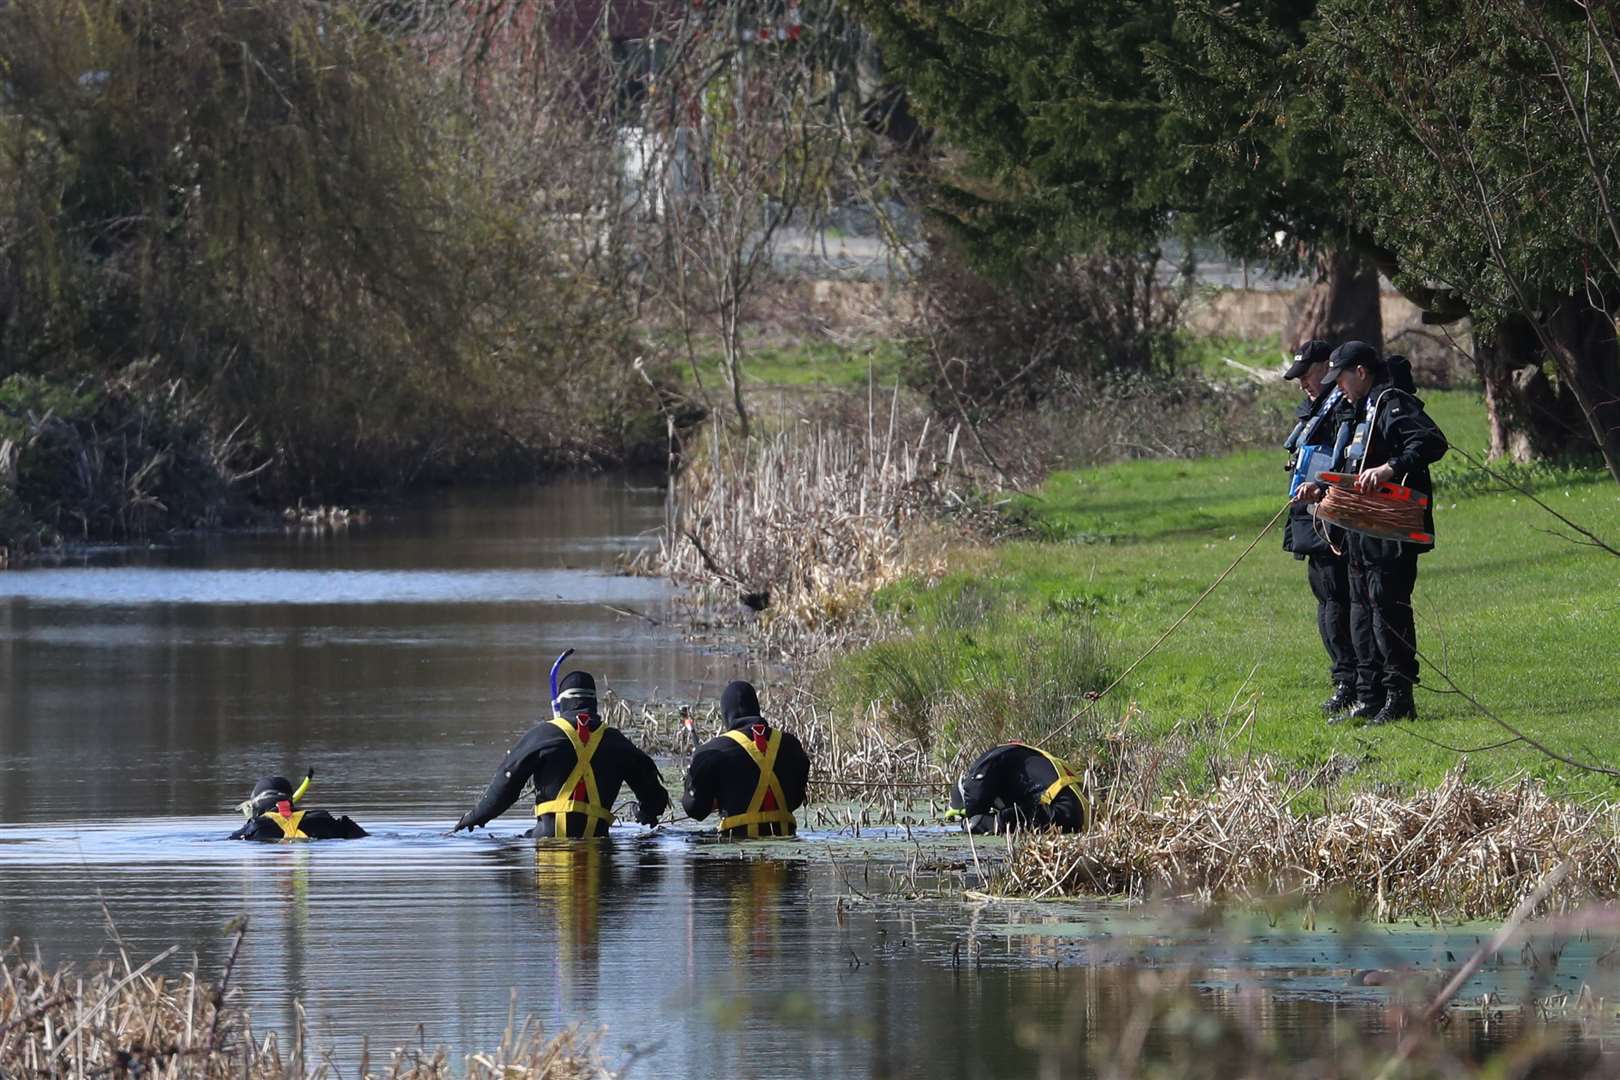 Police divers search near Rope Walk in Sandwich, Kent, on Monday (Gareth Fuller/PA)